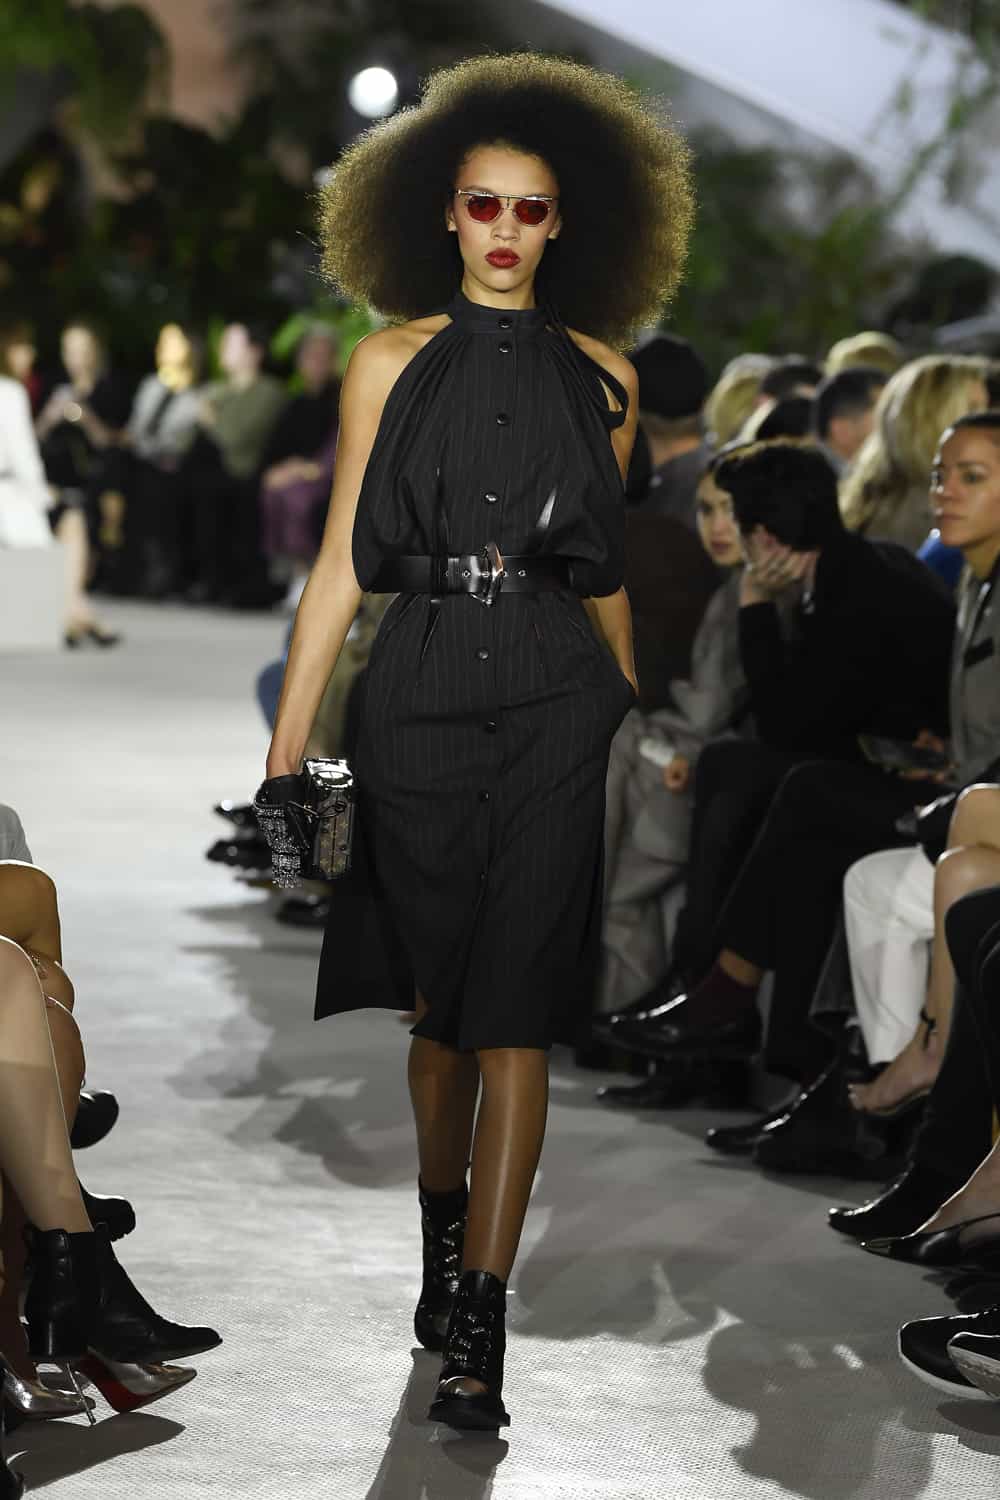 Louis Vuitton Cruises Into New York, Tom Ford Wants a Shorter NYFW